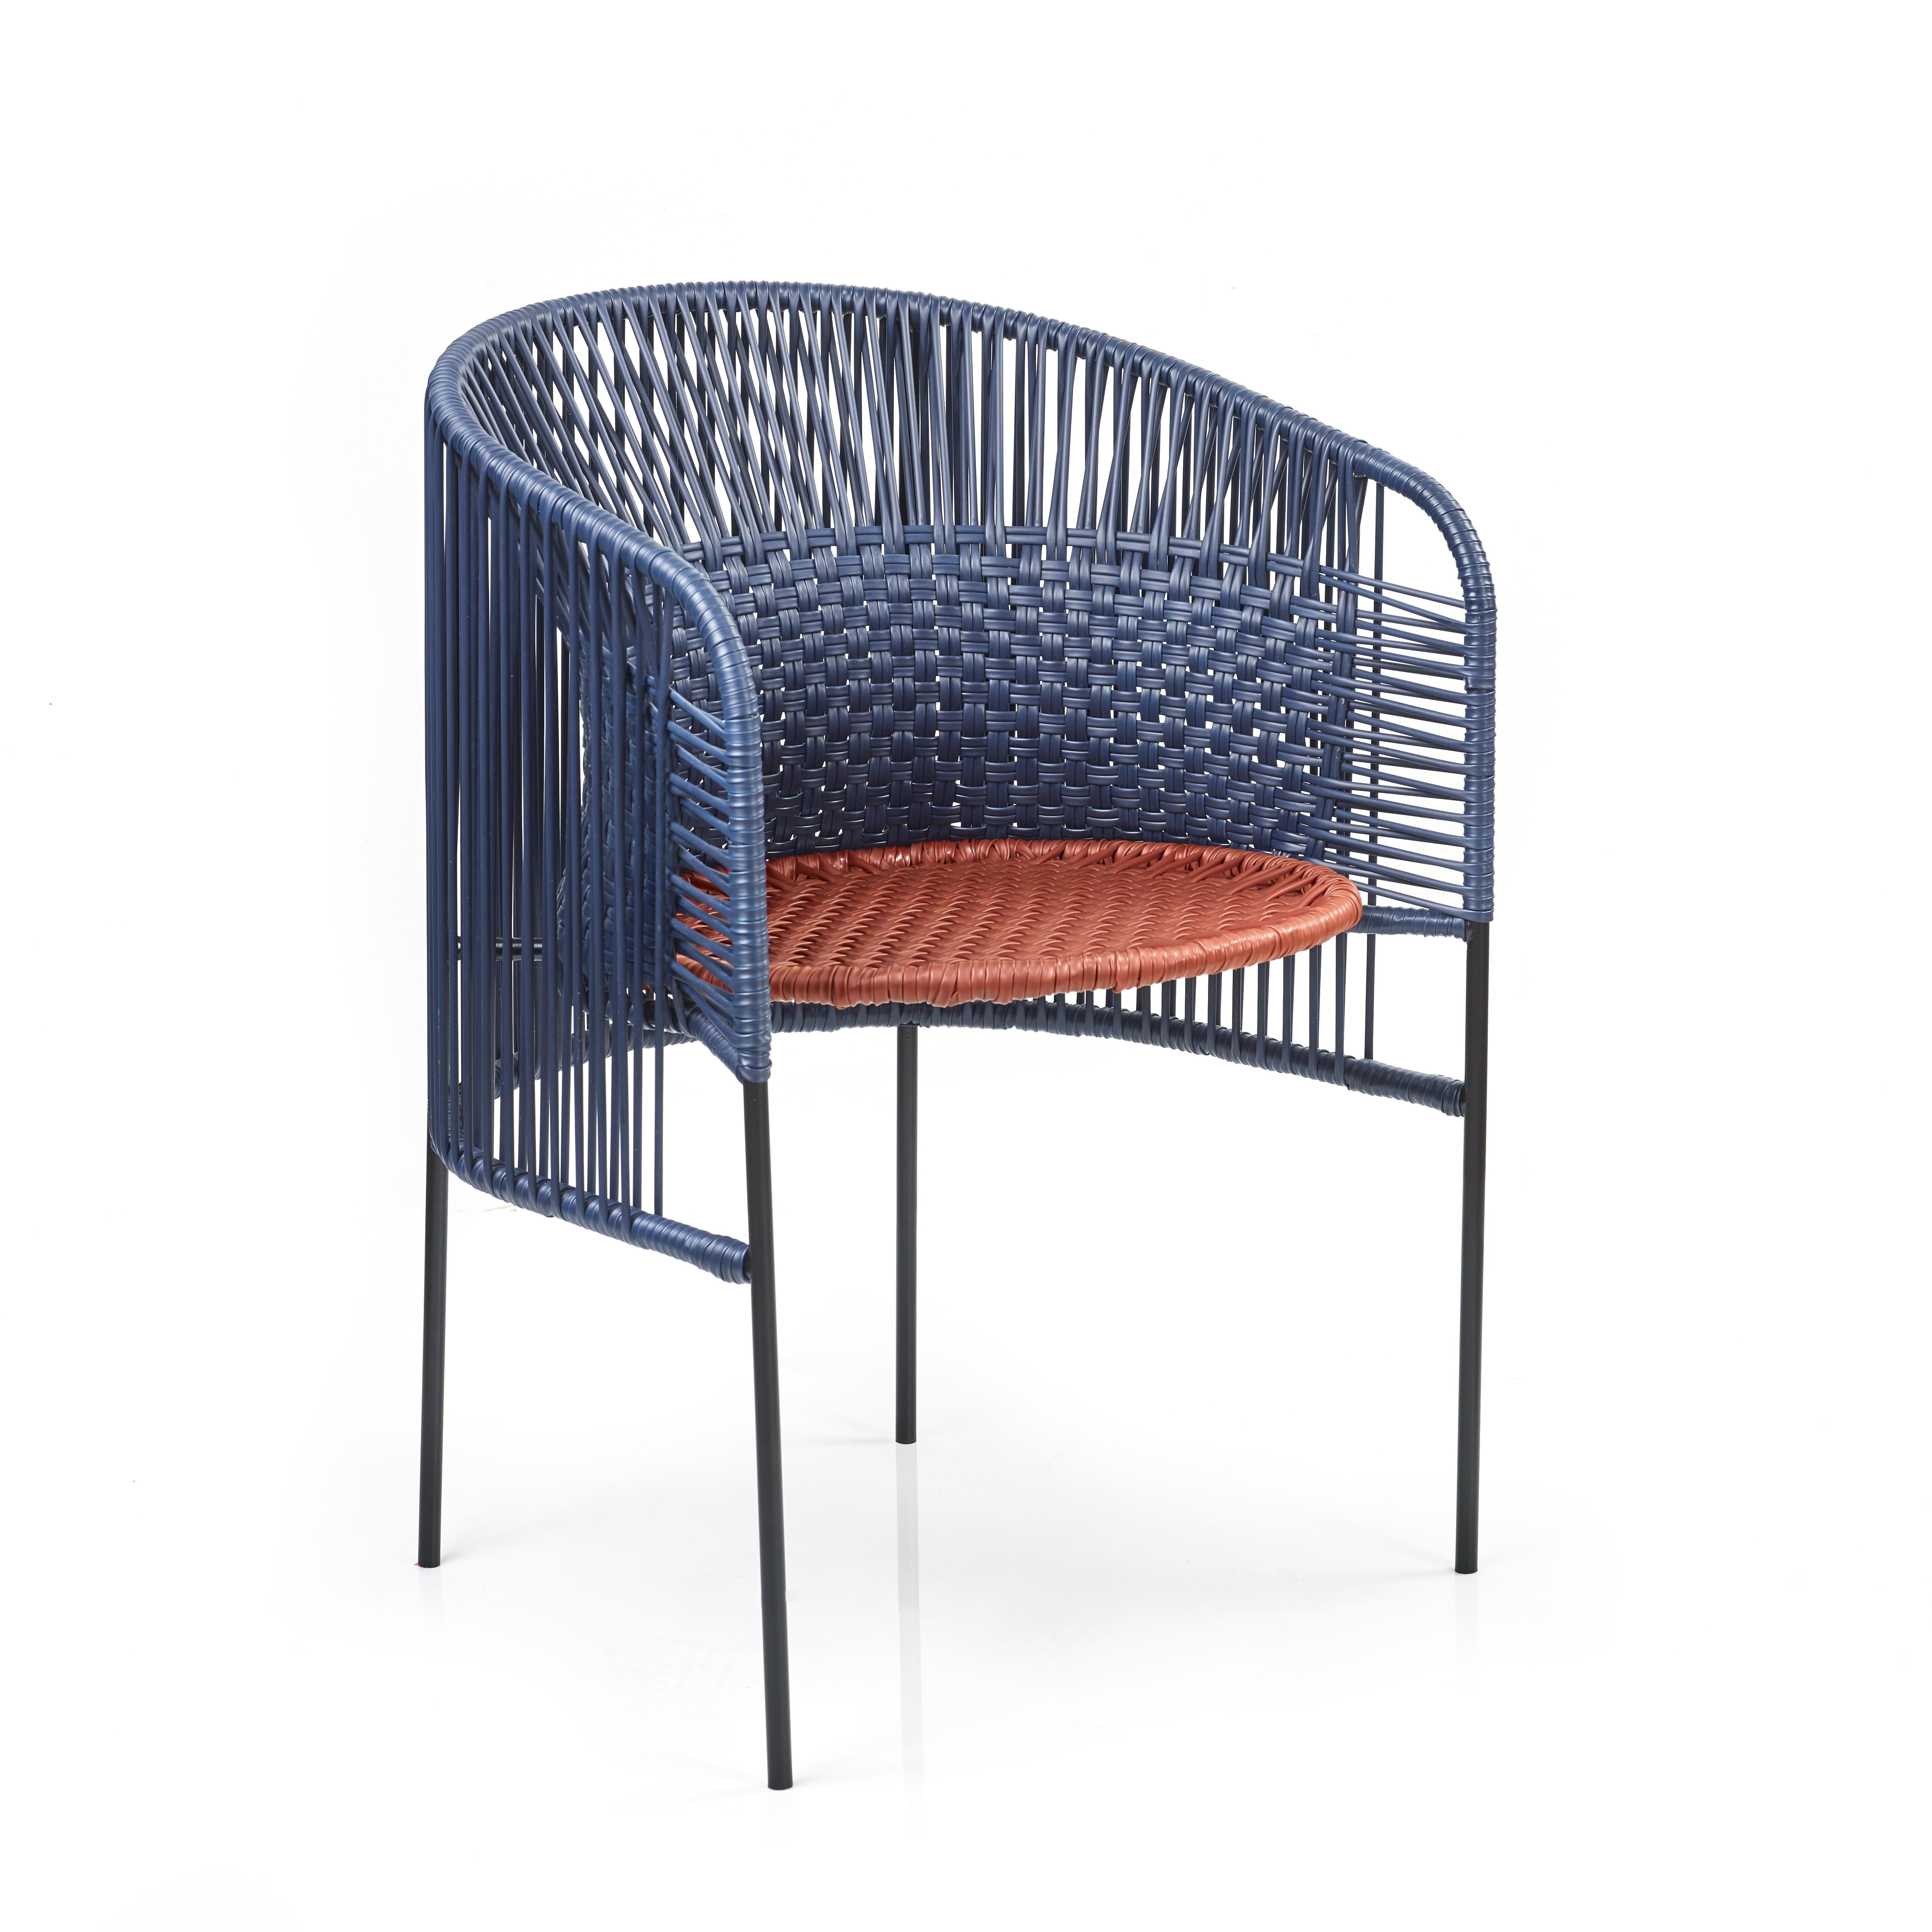 Set of 4 blue caribe chic dining chair by Sebastian Herkner
Materials: Galvanized and powder-coated tubular steel. PVC strings are made from recycled plastic.
Technique: Made from recycled plastic and weaved by local craftspeople in Colombia.